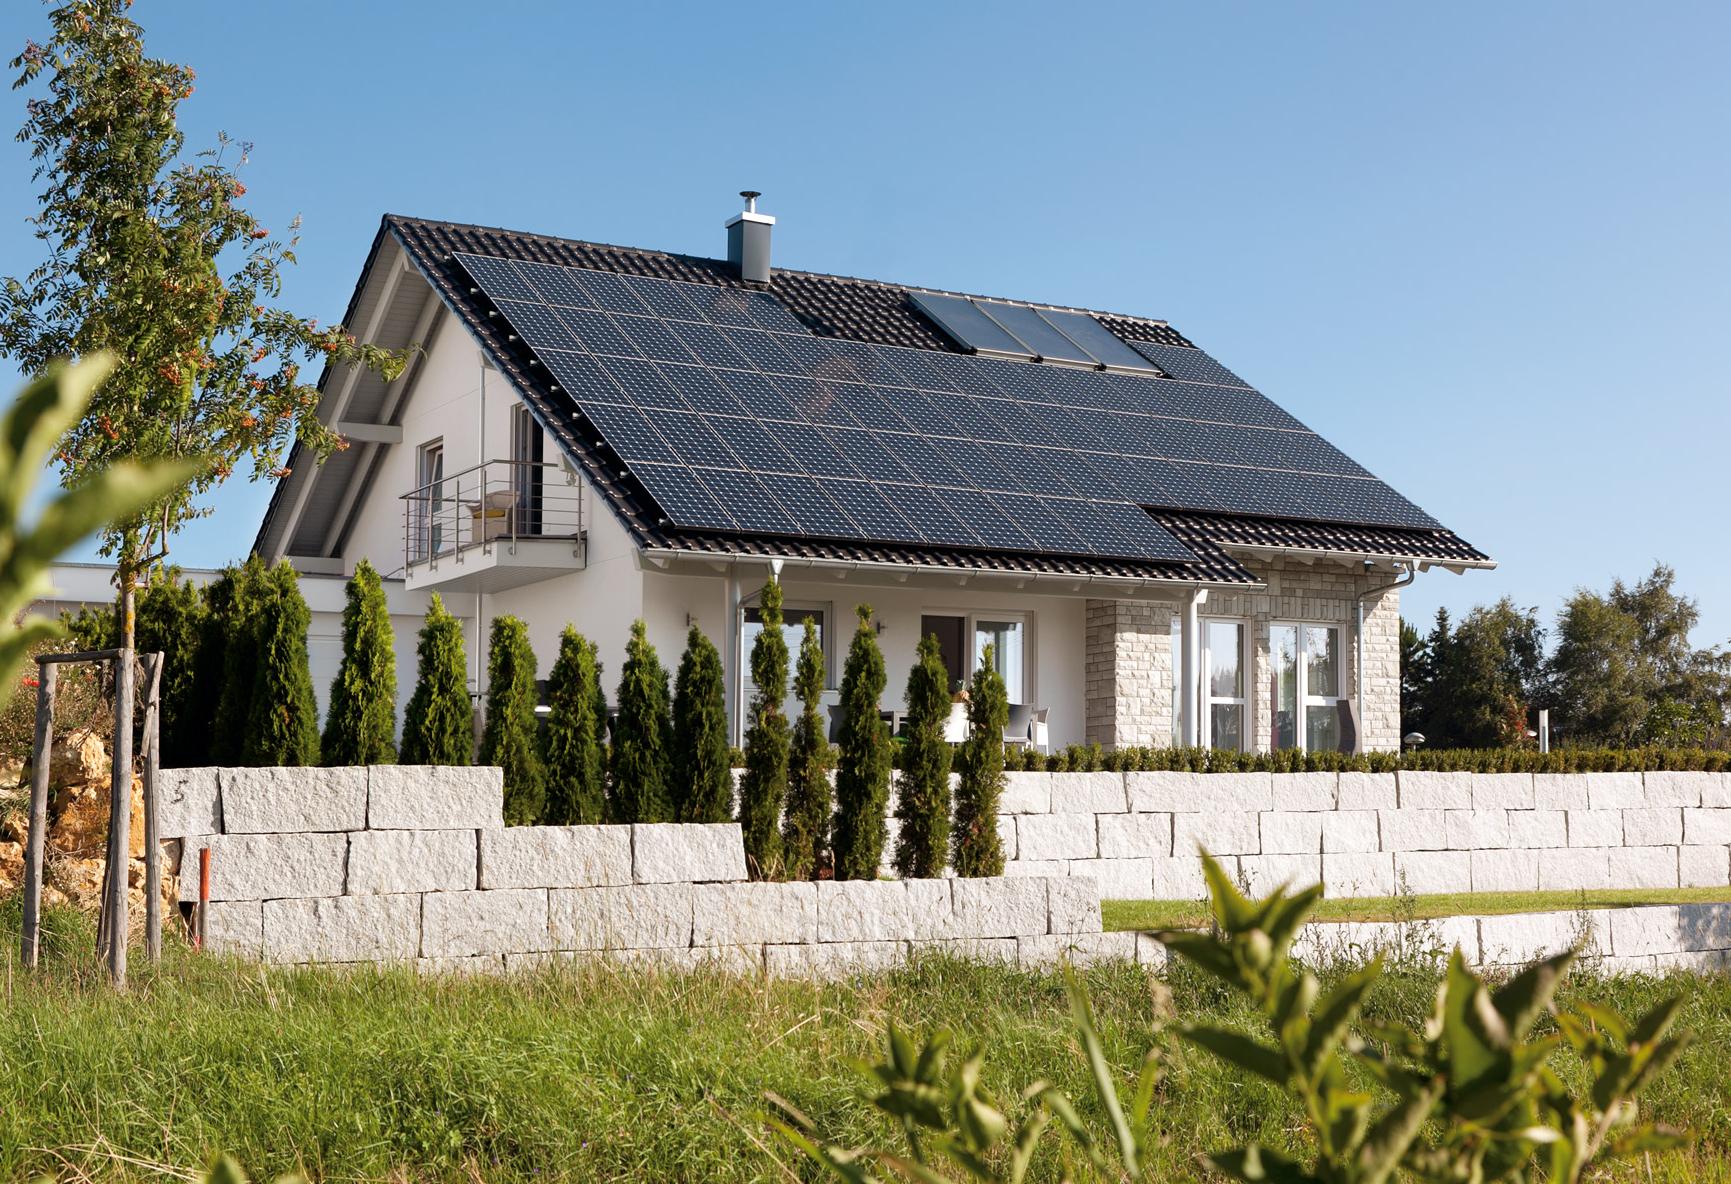 Plus energy house with in-roof photovoltaic system